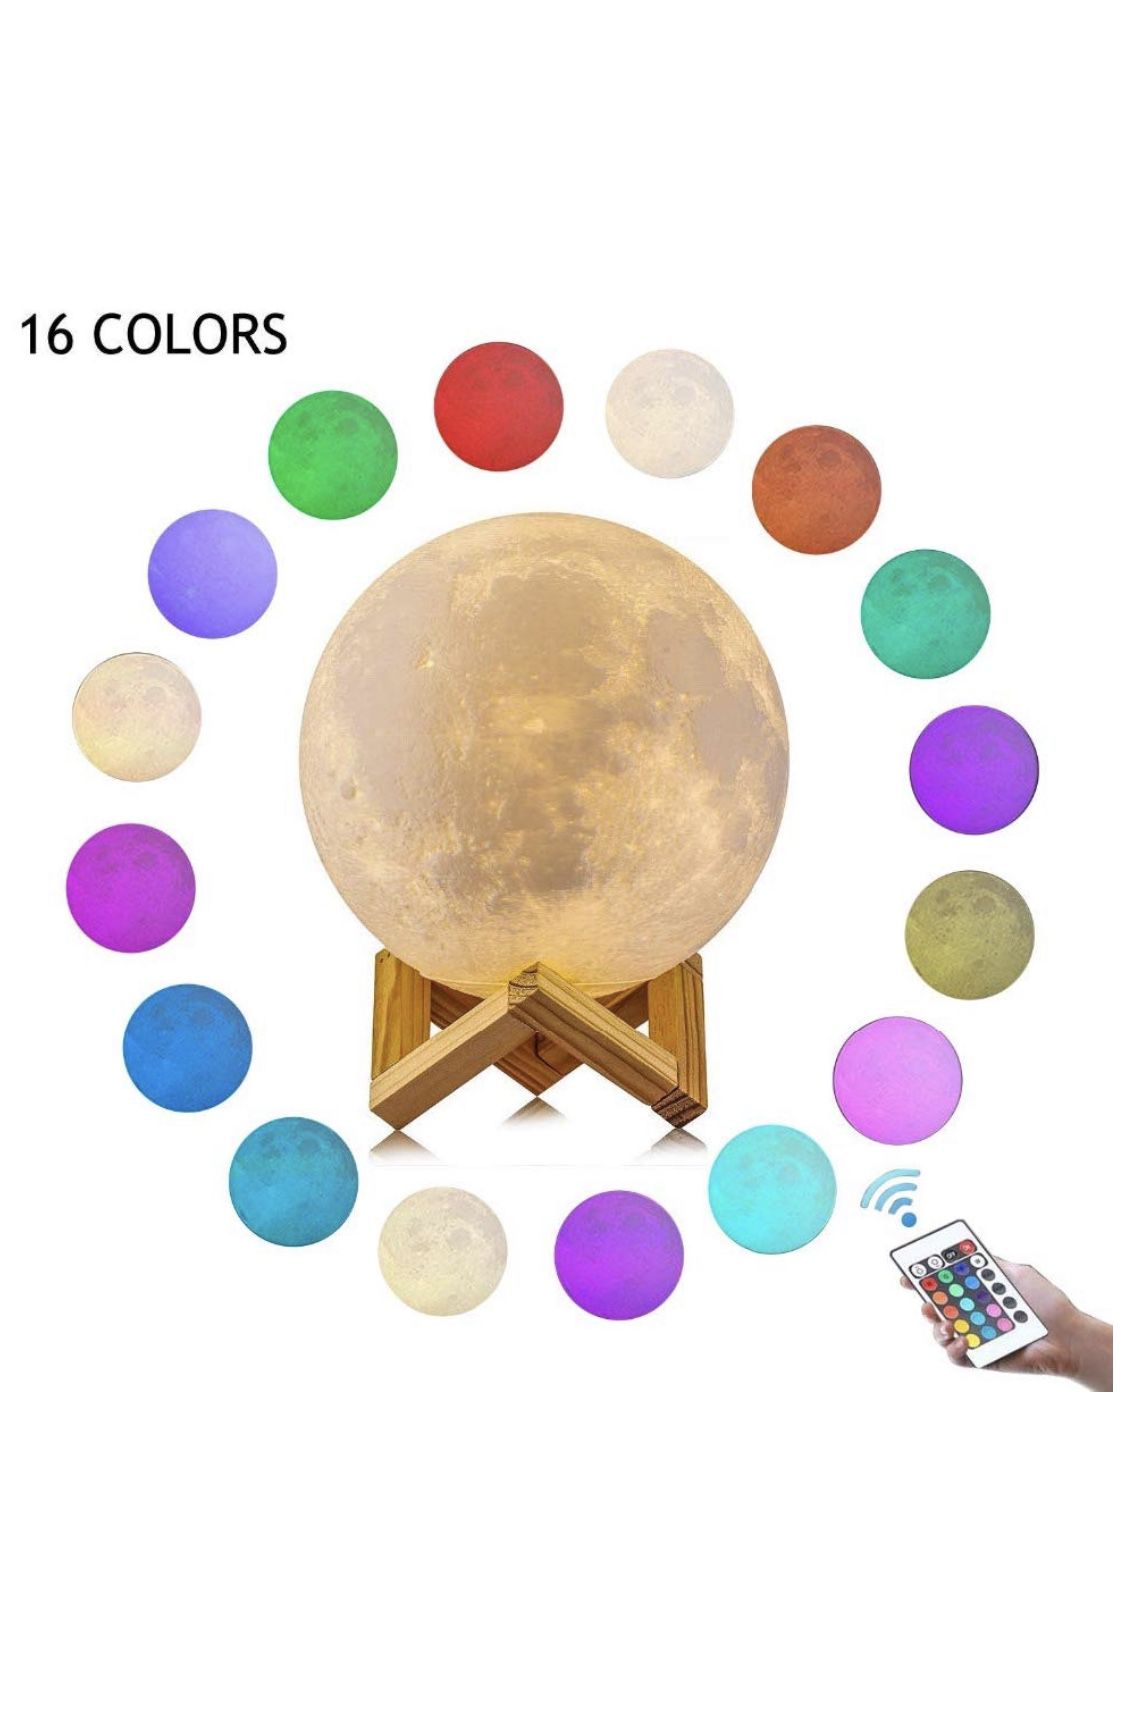 3D Moon Lamp 16 Colors 5.9 inch Night Stand Light Lunar with Remote,Hanging Light, Brightness Control, Touch Control | Night Rechargeable Moon Globe